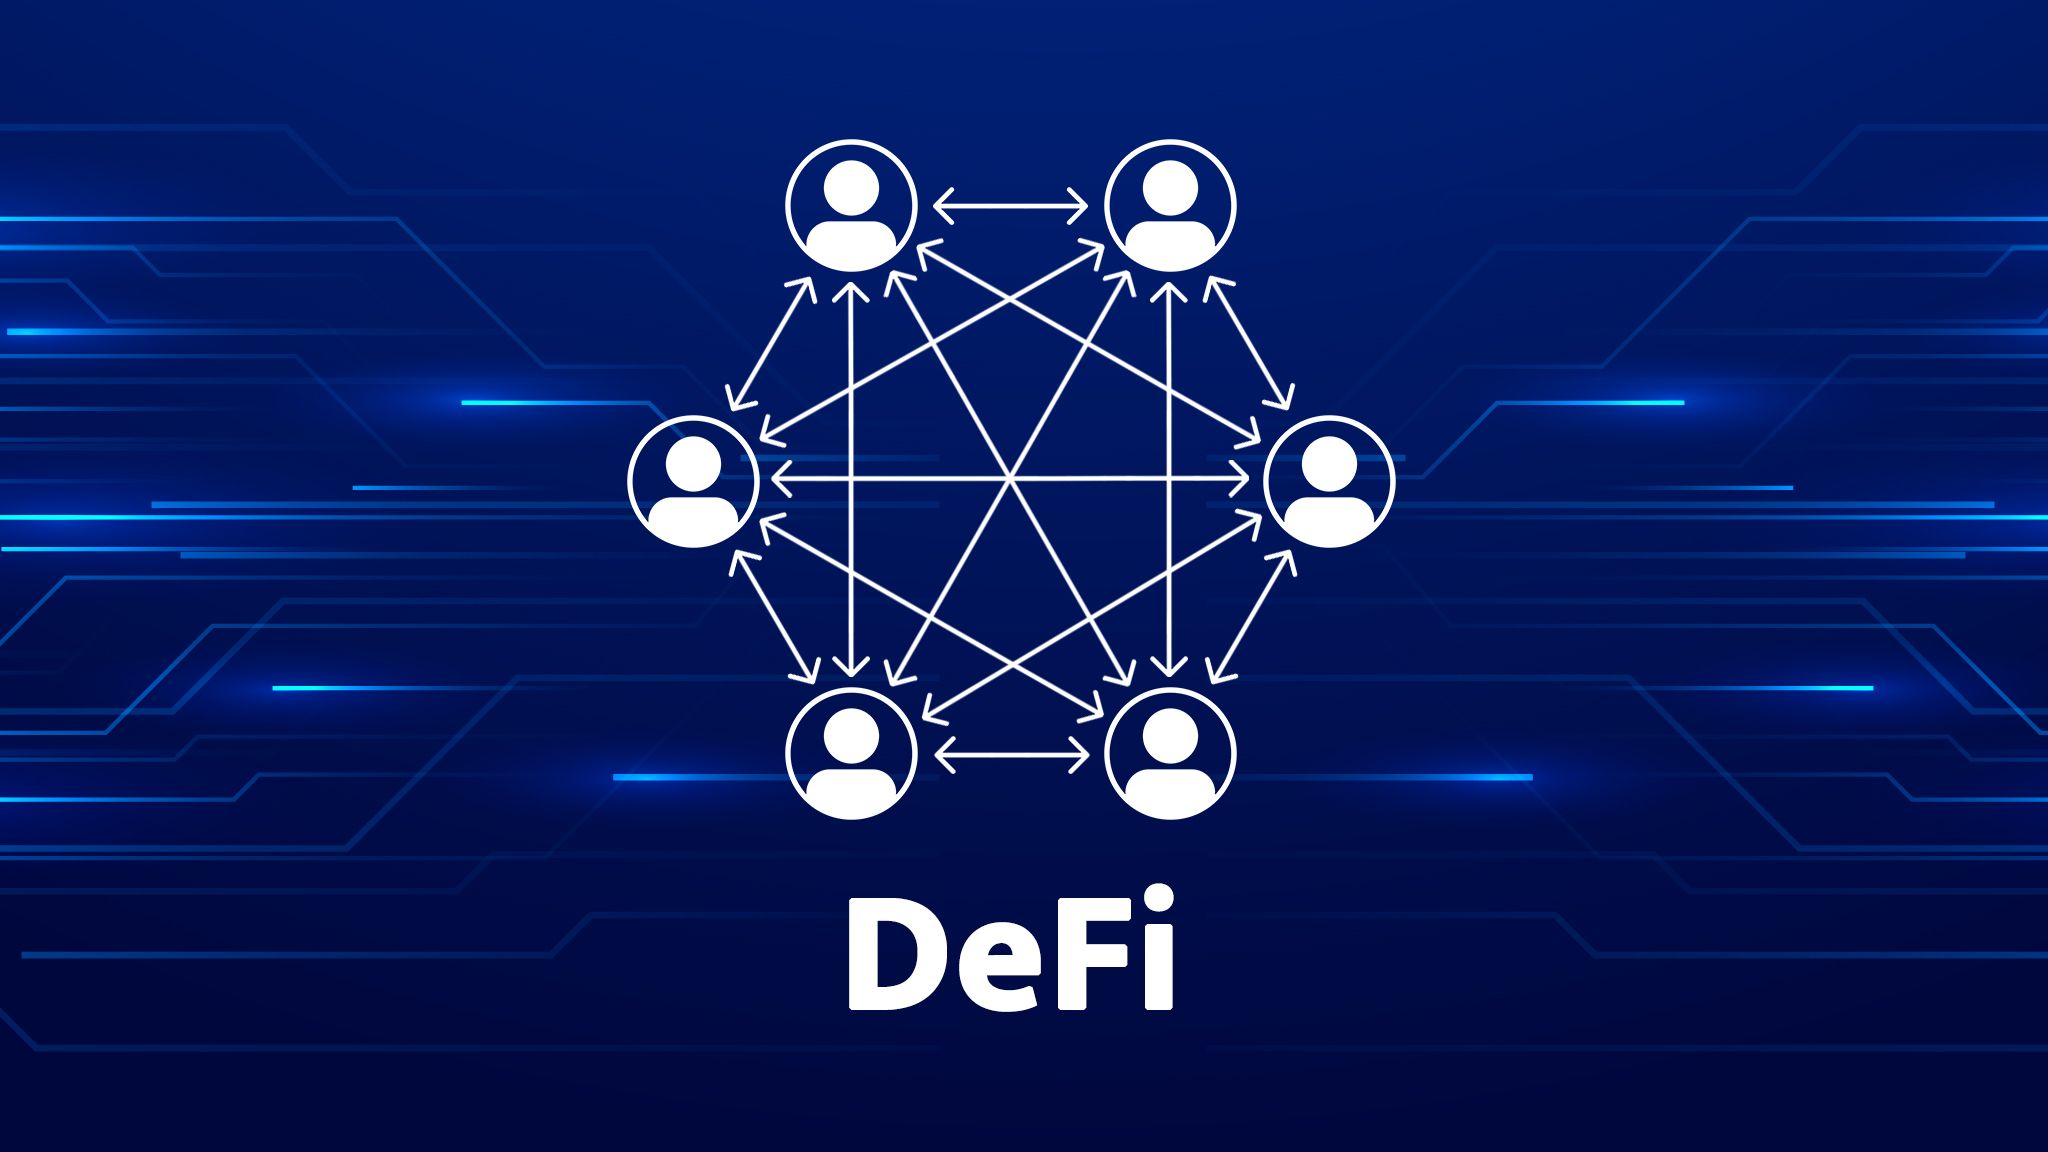 Decentralized Finance (DeFi) 2.0: The Next Phase of Financial Evolution